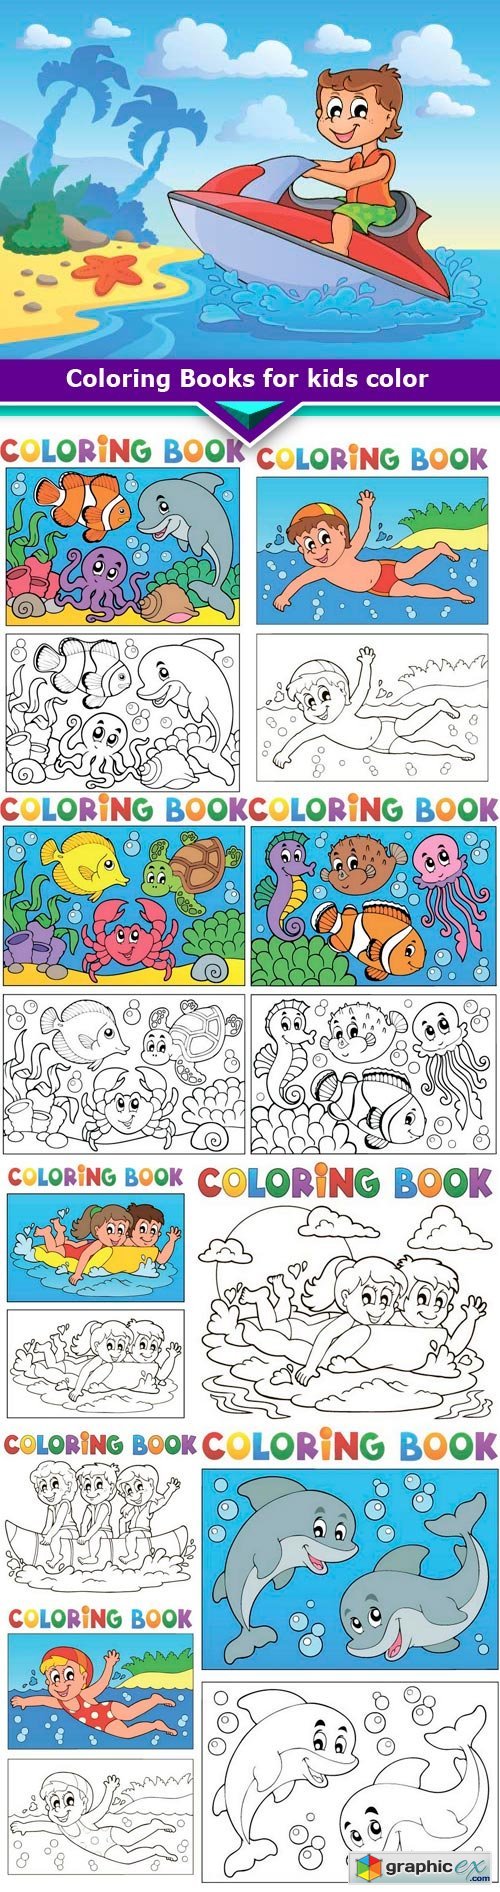 Coloring Books for kids color 10x EPS